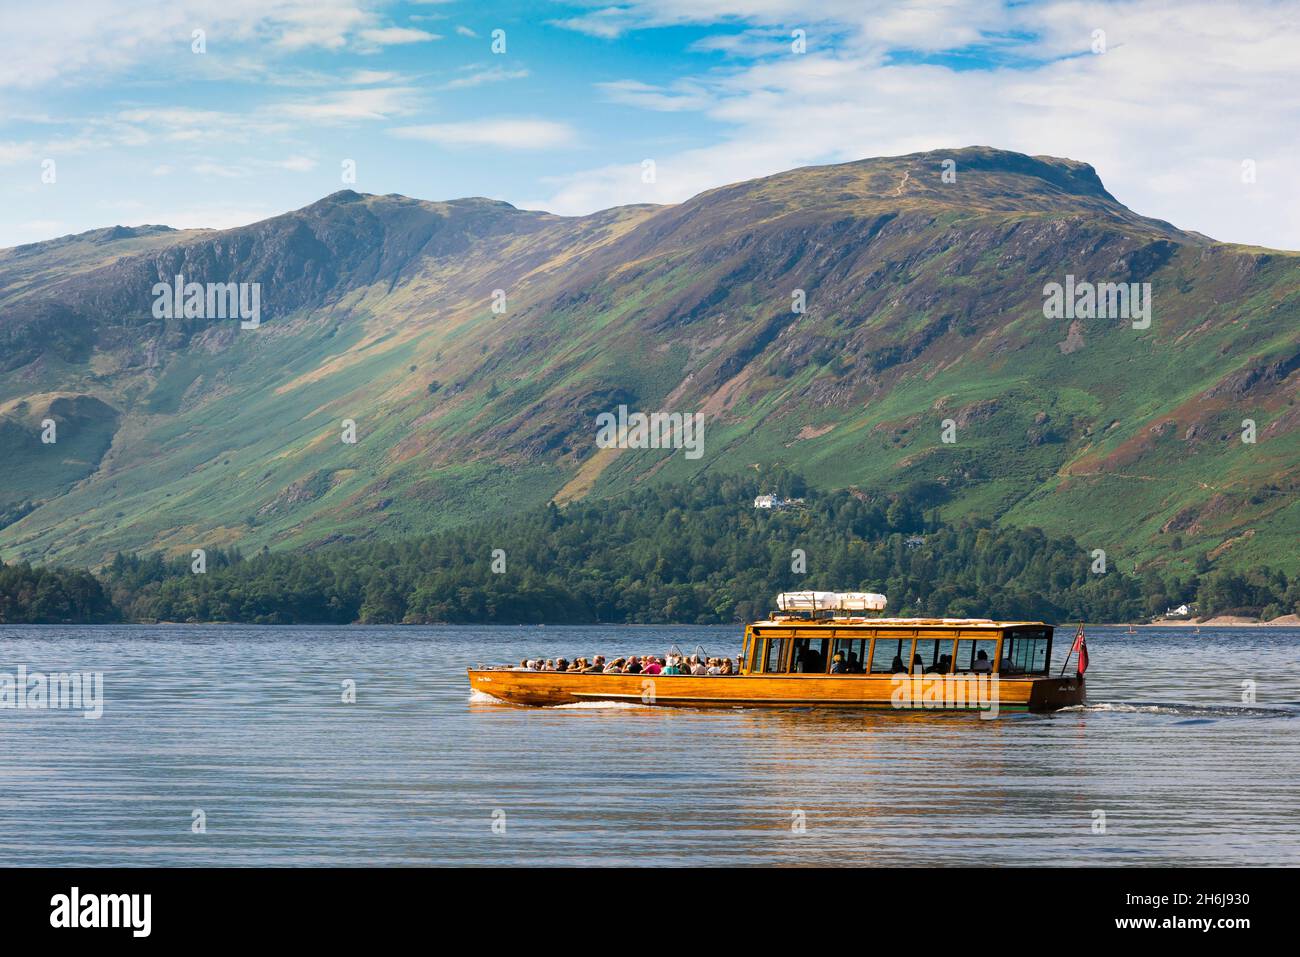 Lake District tourism, summer morning view of a ferry boat cruising Derwent Water with a view of the high Derwent Fells in the distance, England UK Stock Photo